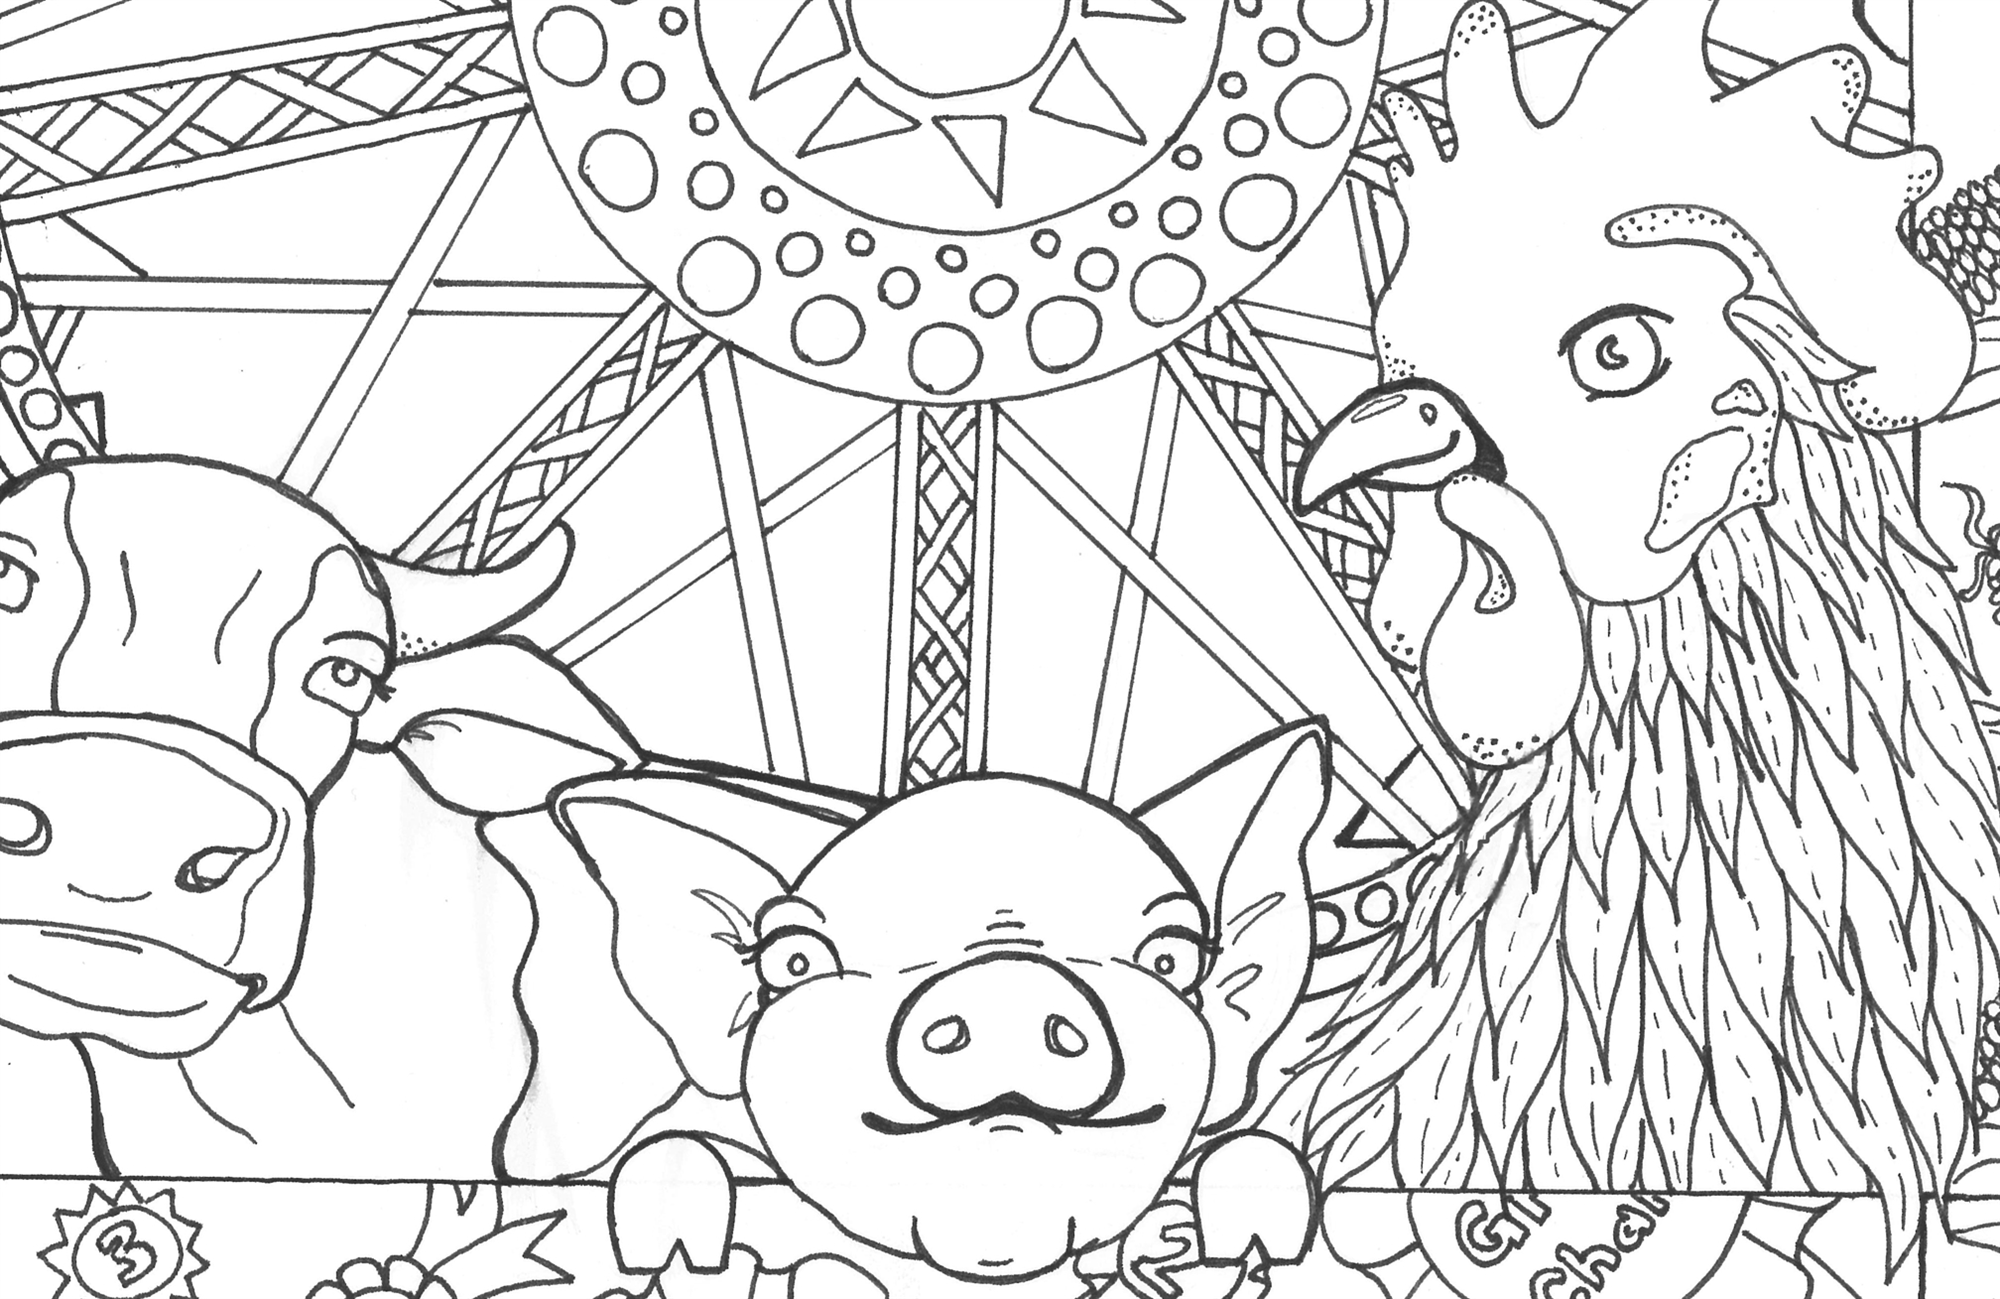 Free All Ages Coloring Contest